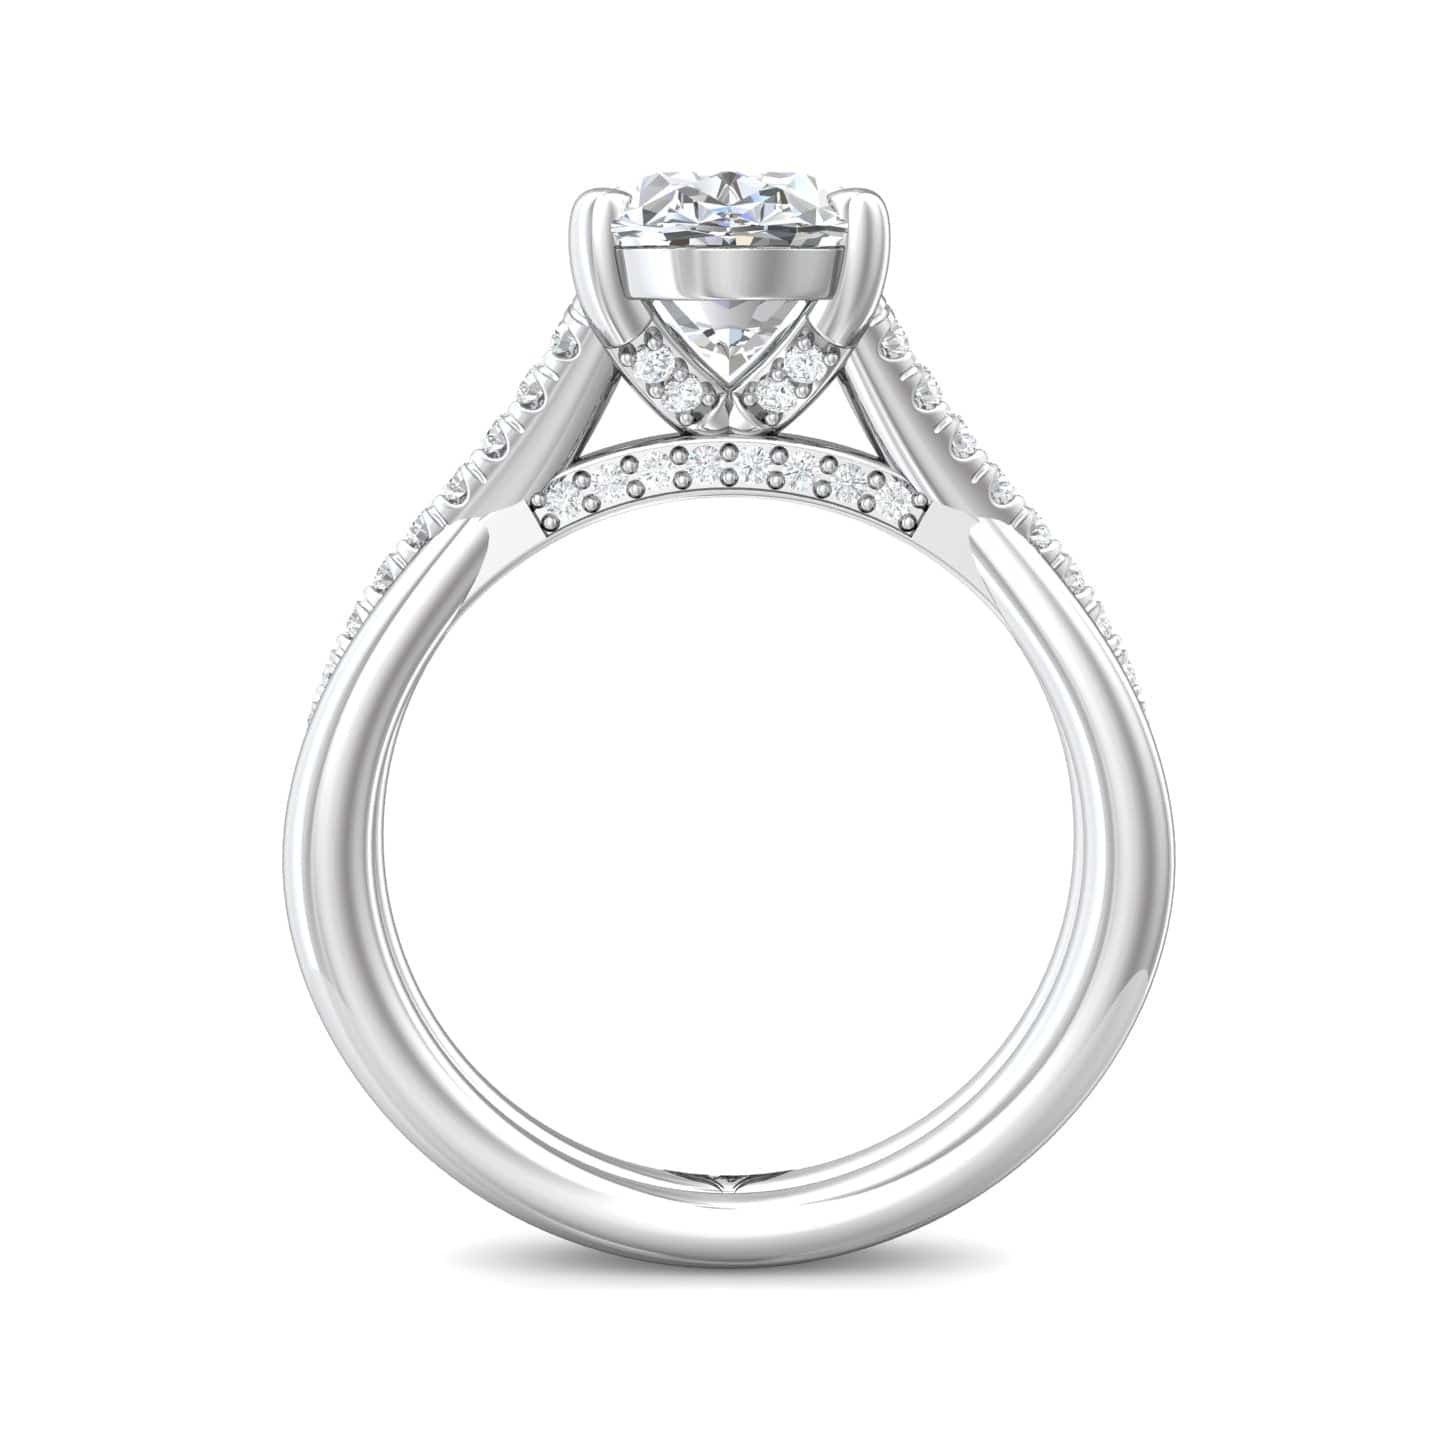 Platinum Twisted 4 Prong Diamond Engagement Setting with Hidden Halo